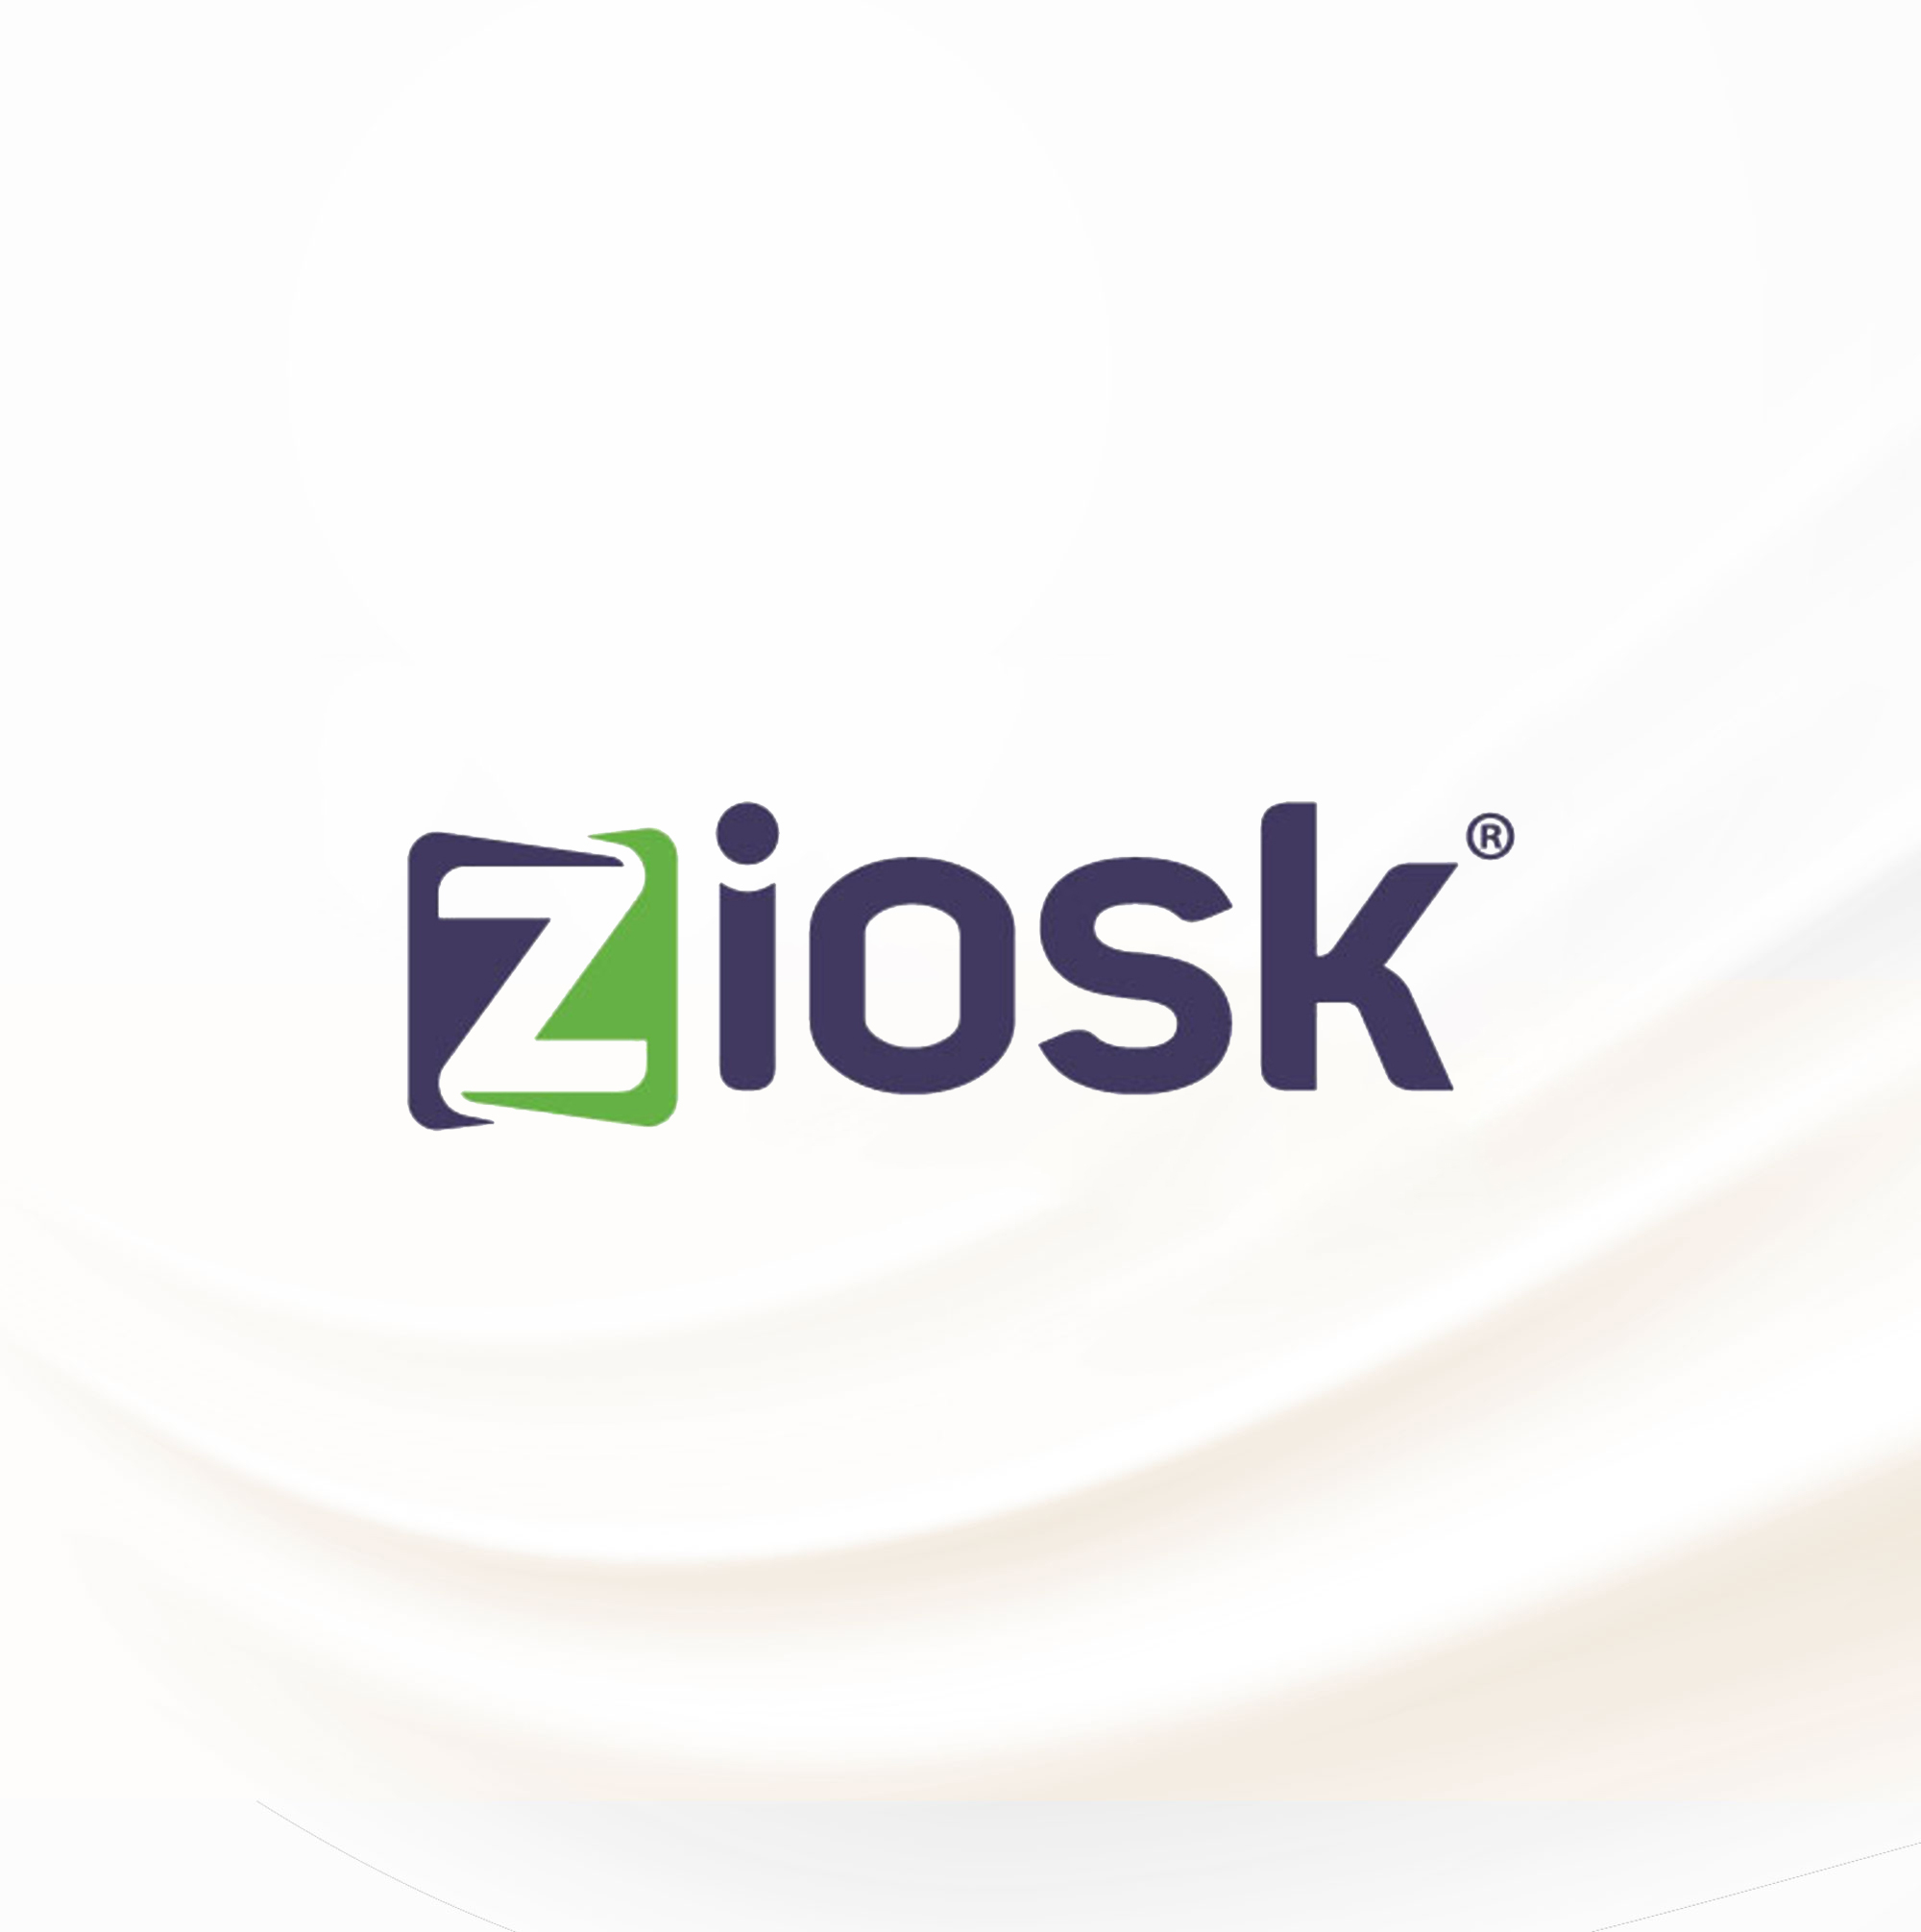 Game Play Network To Explore B2c Expansion On The Ziosk Platform